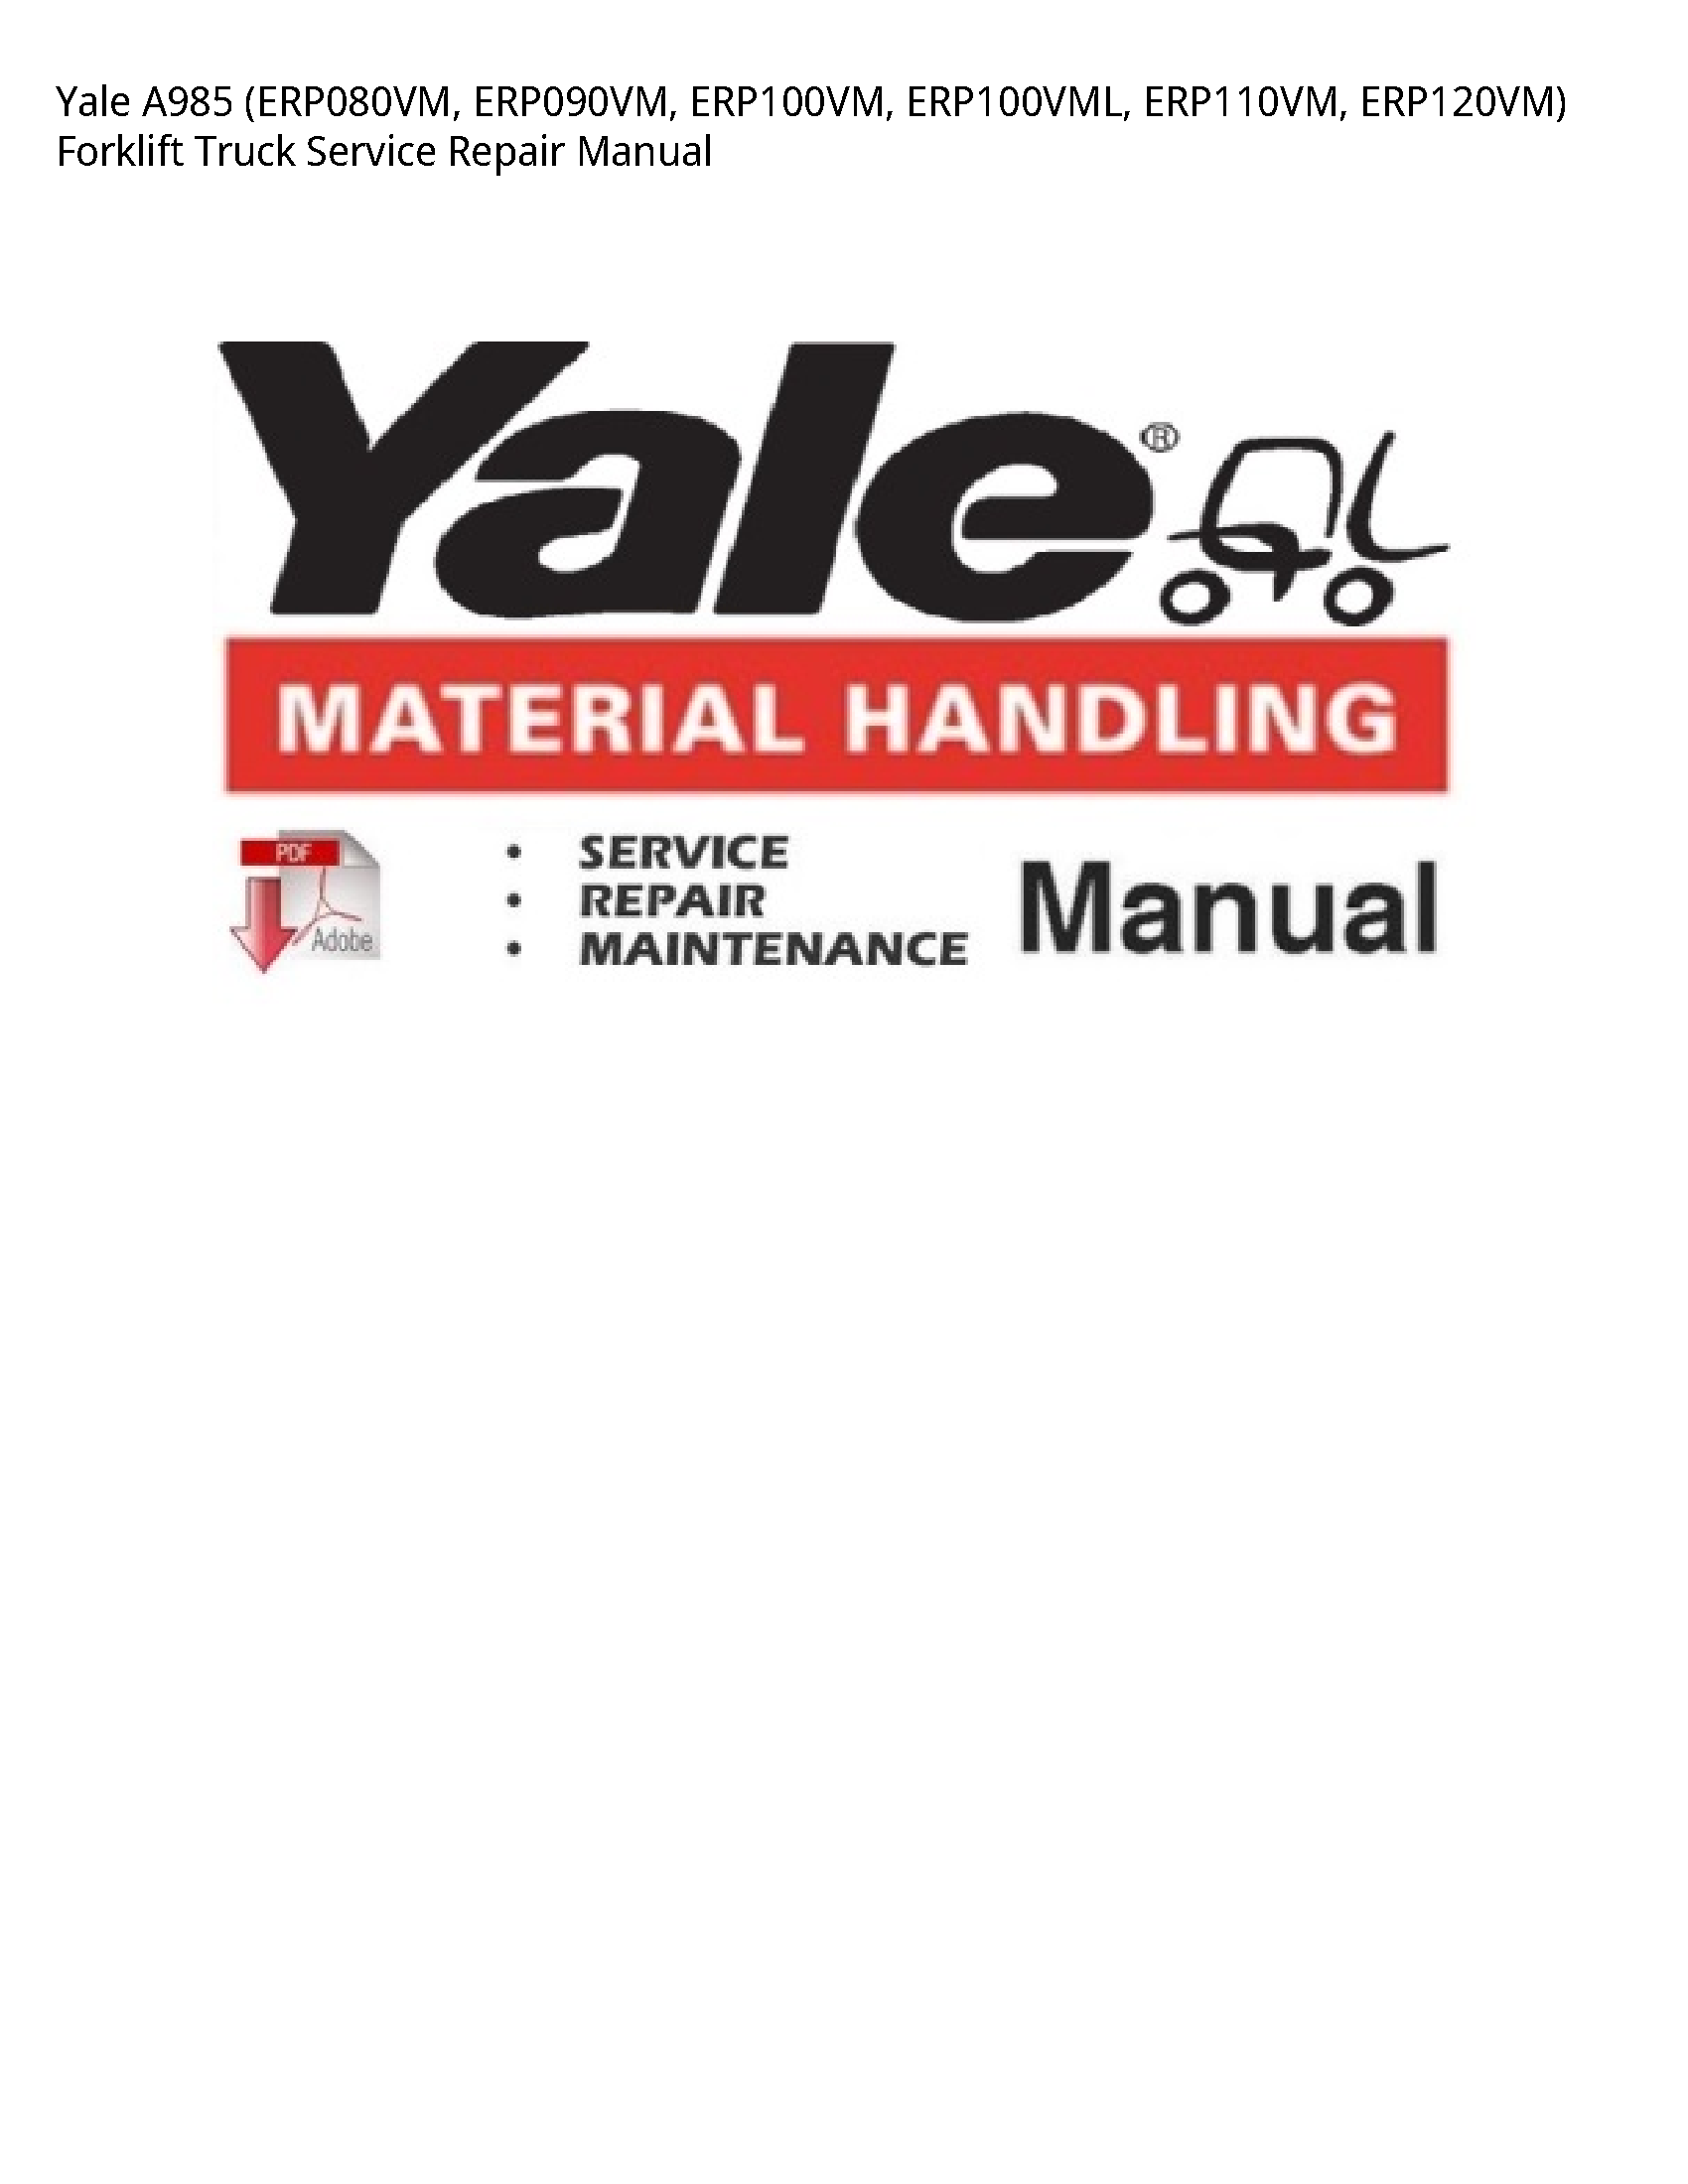 Yale A985 Forklift Truck manual